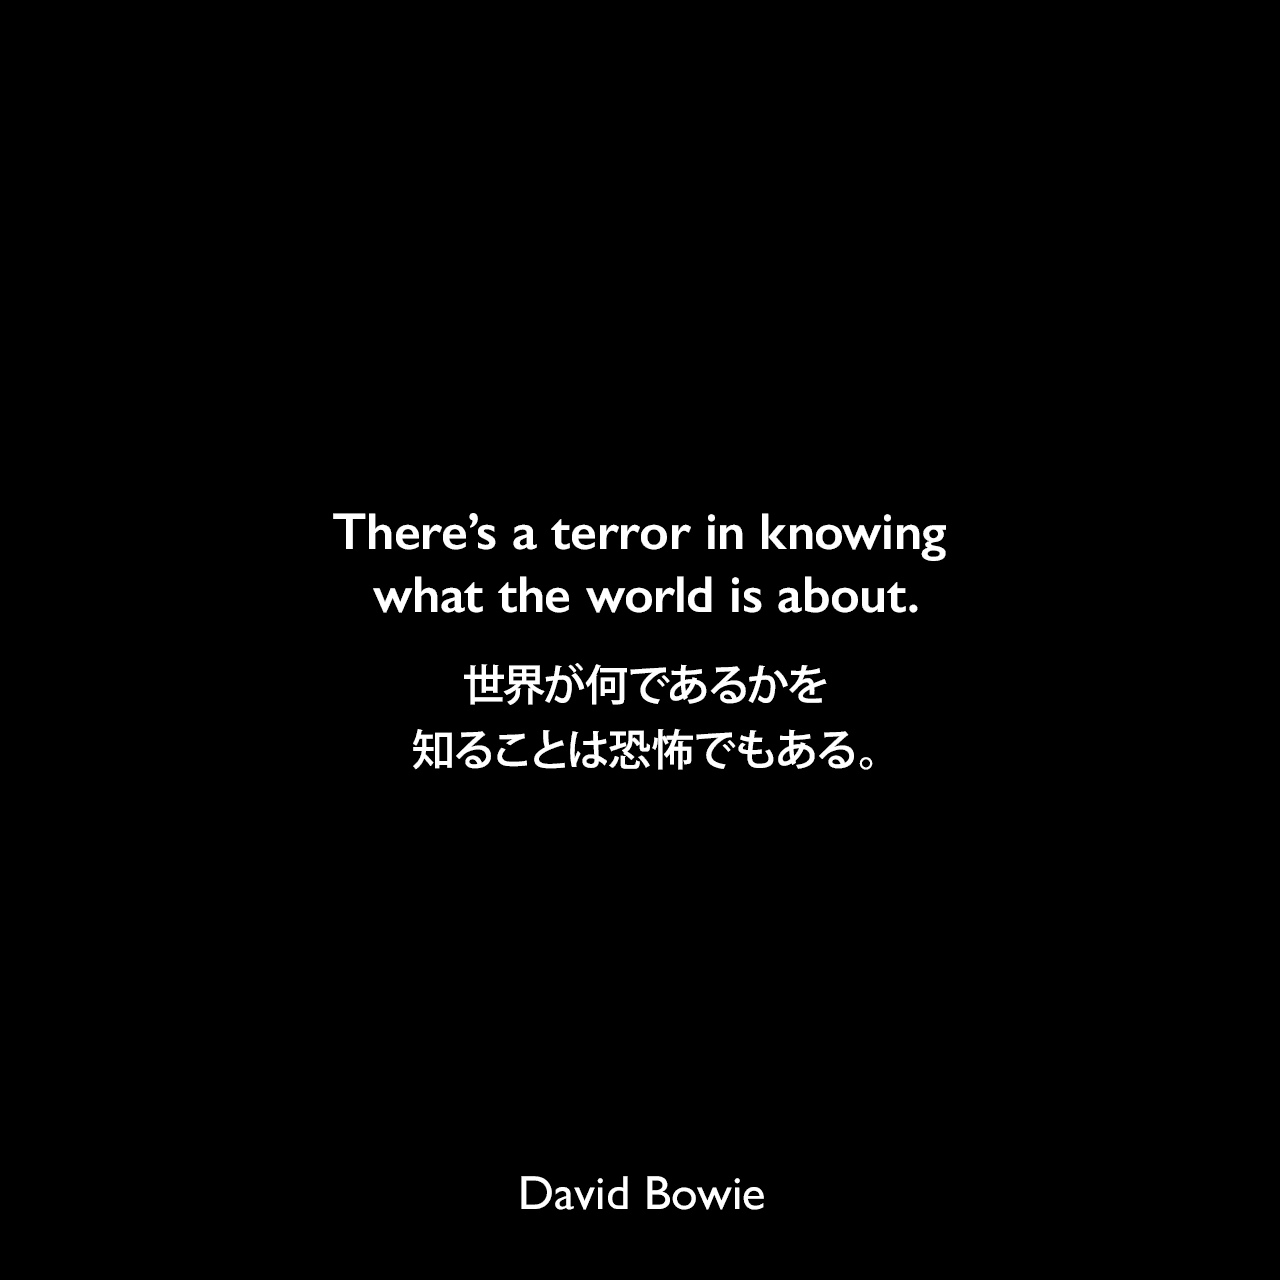 There’s a terror in knowing what the world is about.世界が何であるかを知ることは恐怖でもある。David Bowie